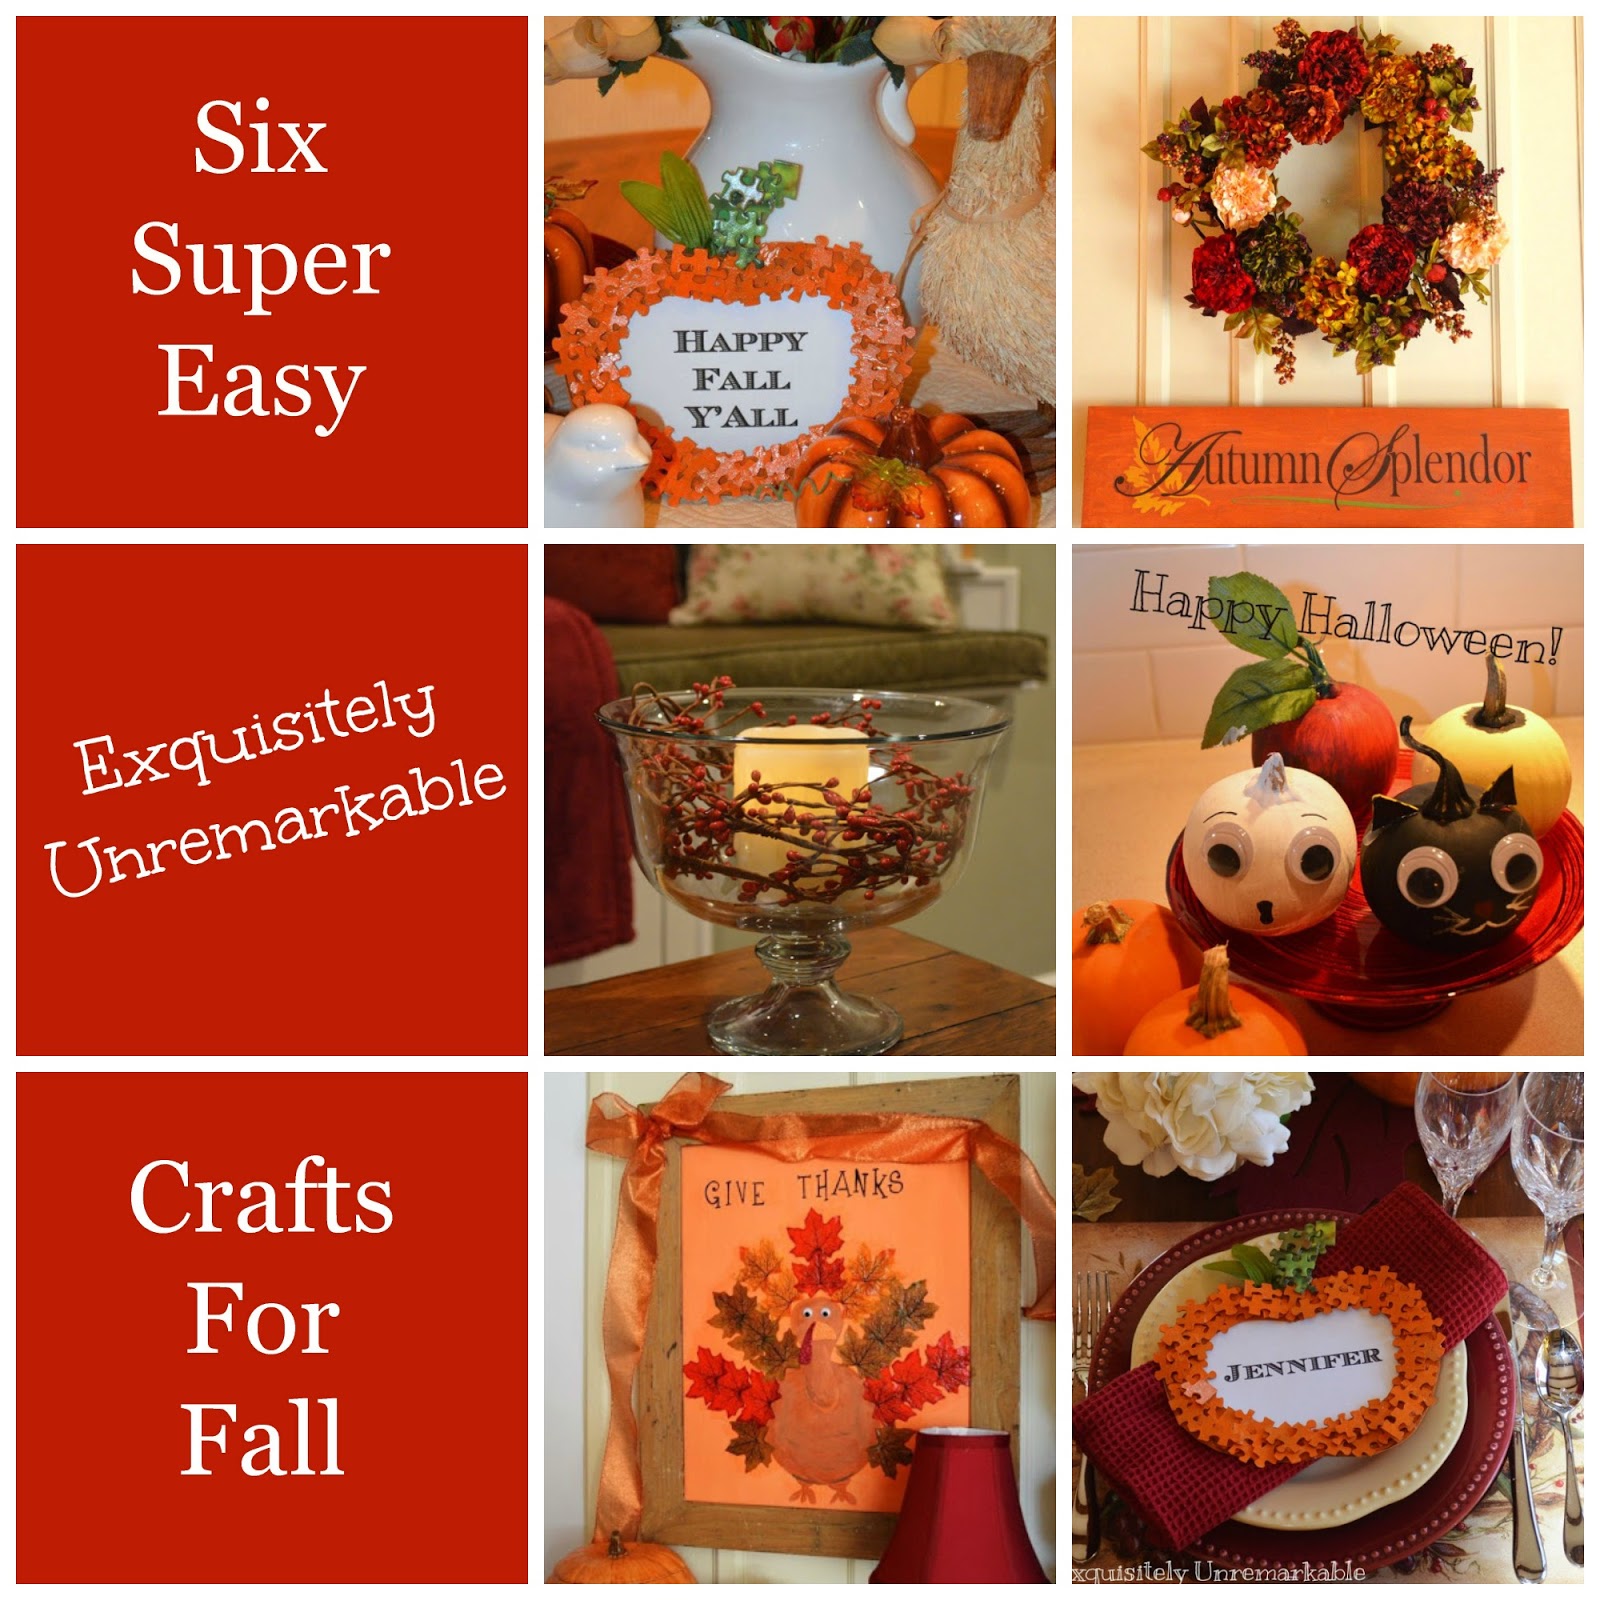 Six Super Easy Crafts For Fall